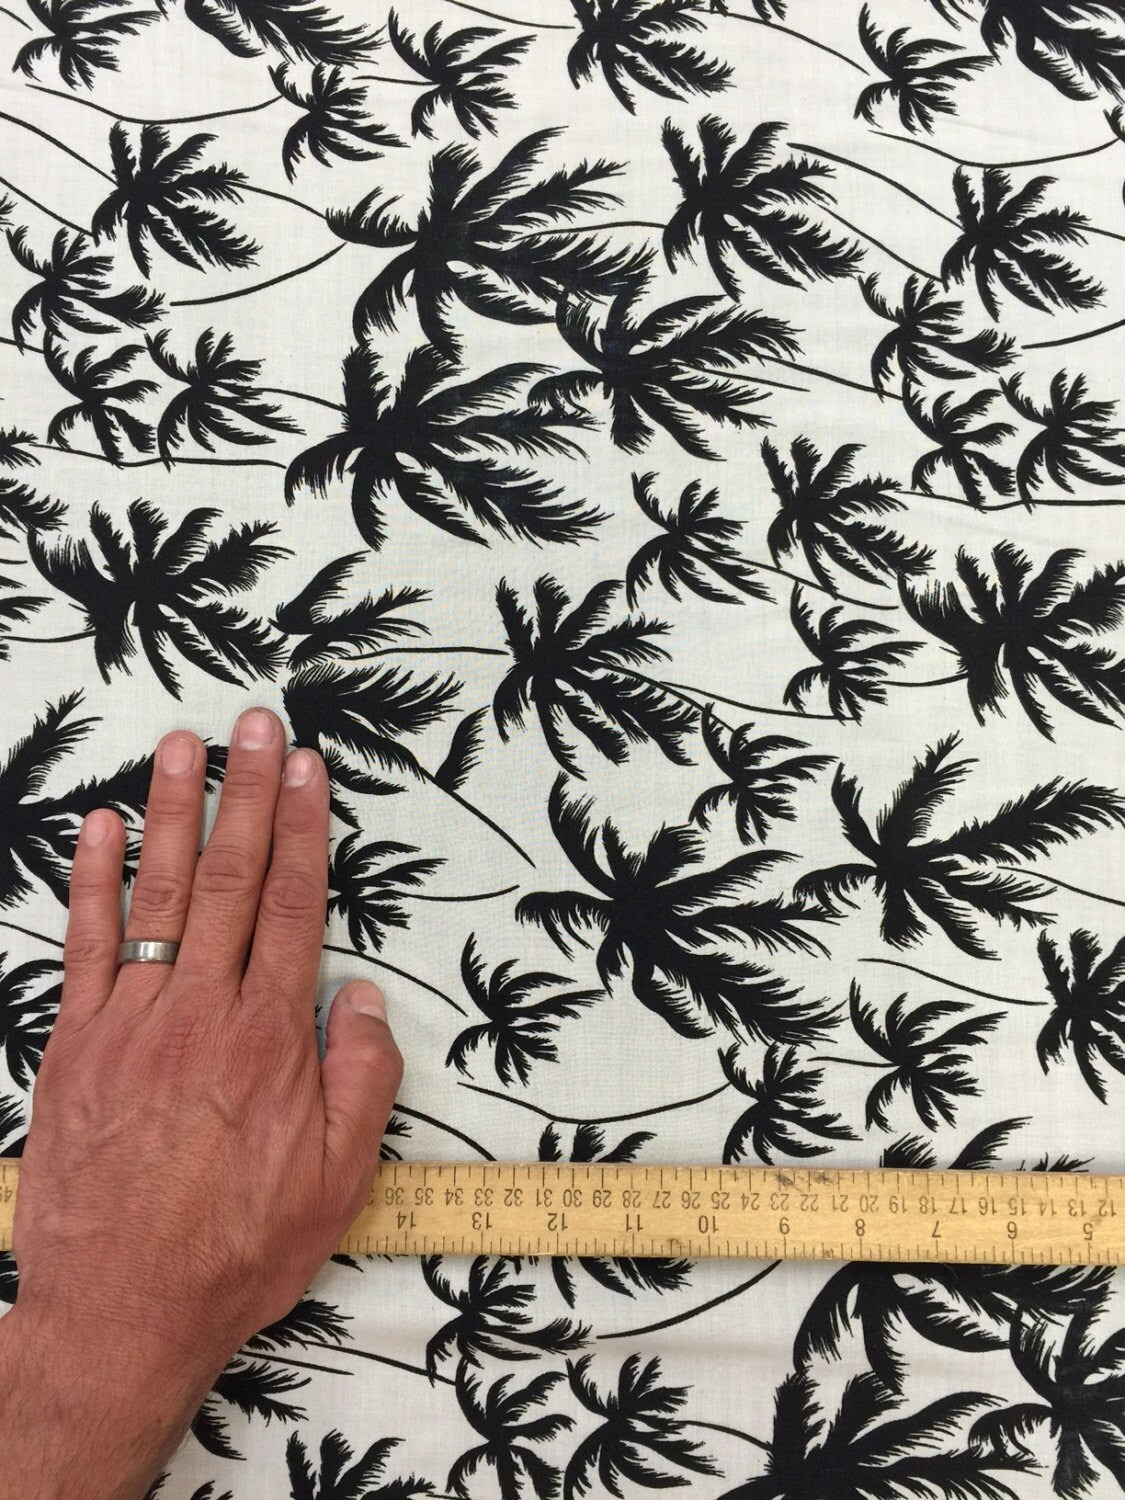 100% Rayon Challis Off white background w Black palm trees. Fabric sold by the yard soft organic kids dress draping clothing decoration